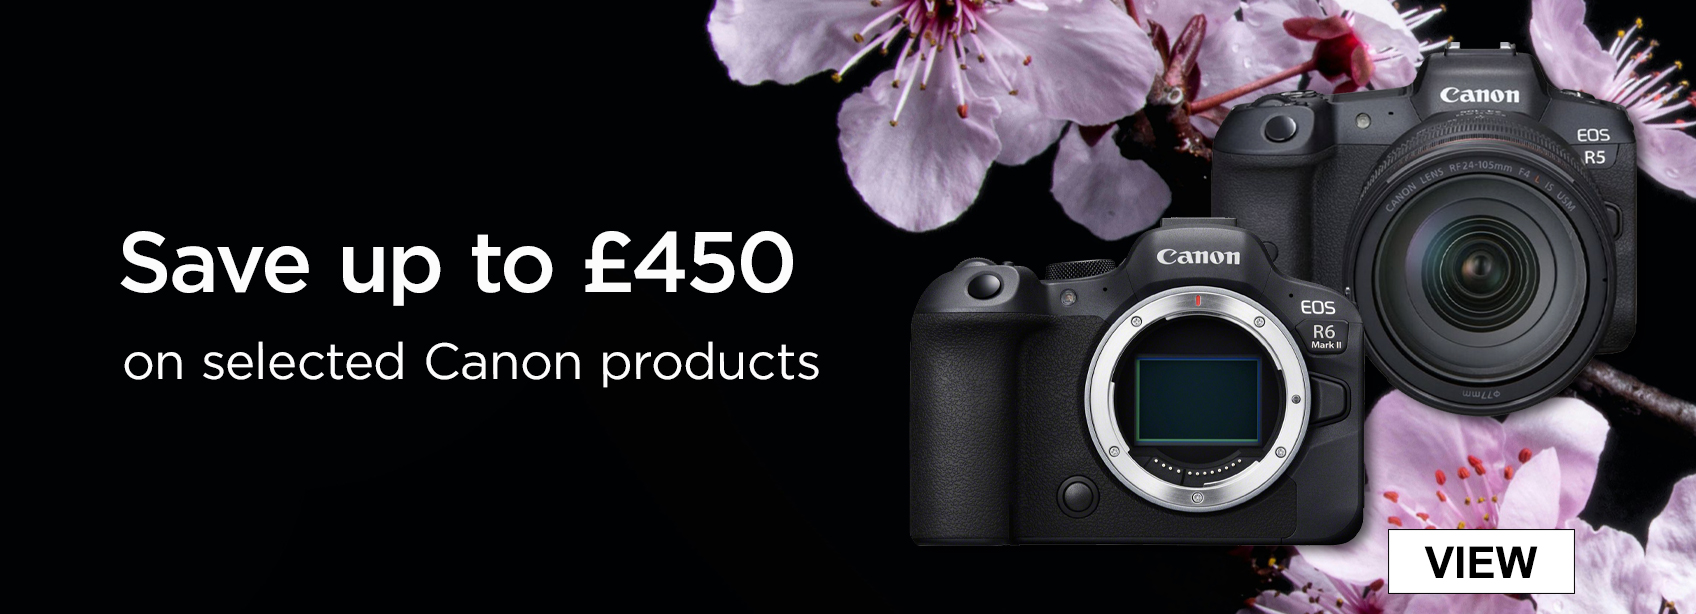 Save up to £450 on selected Canon products